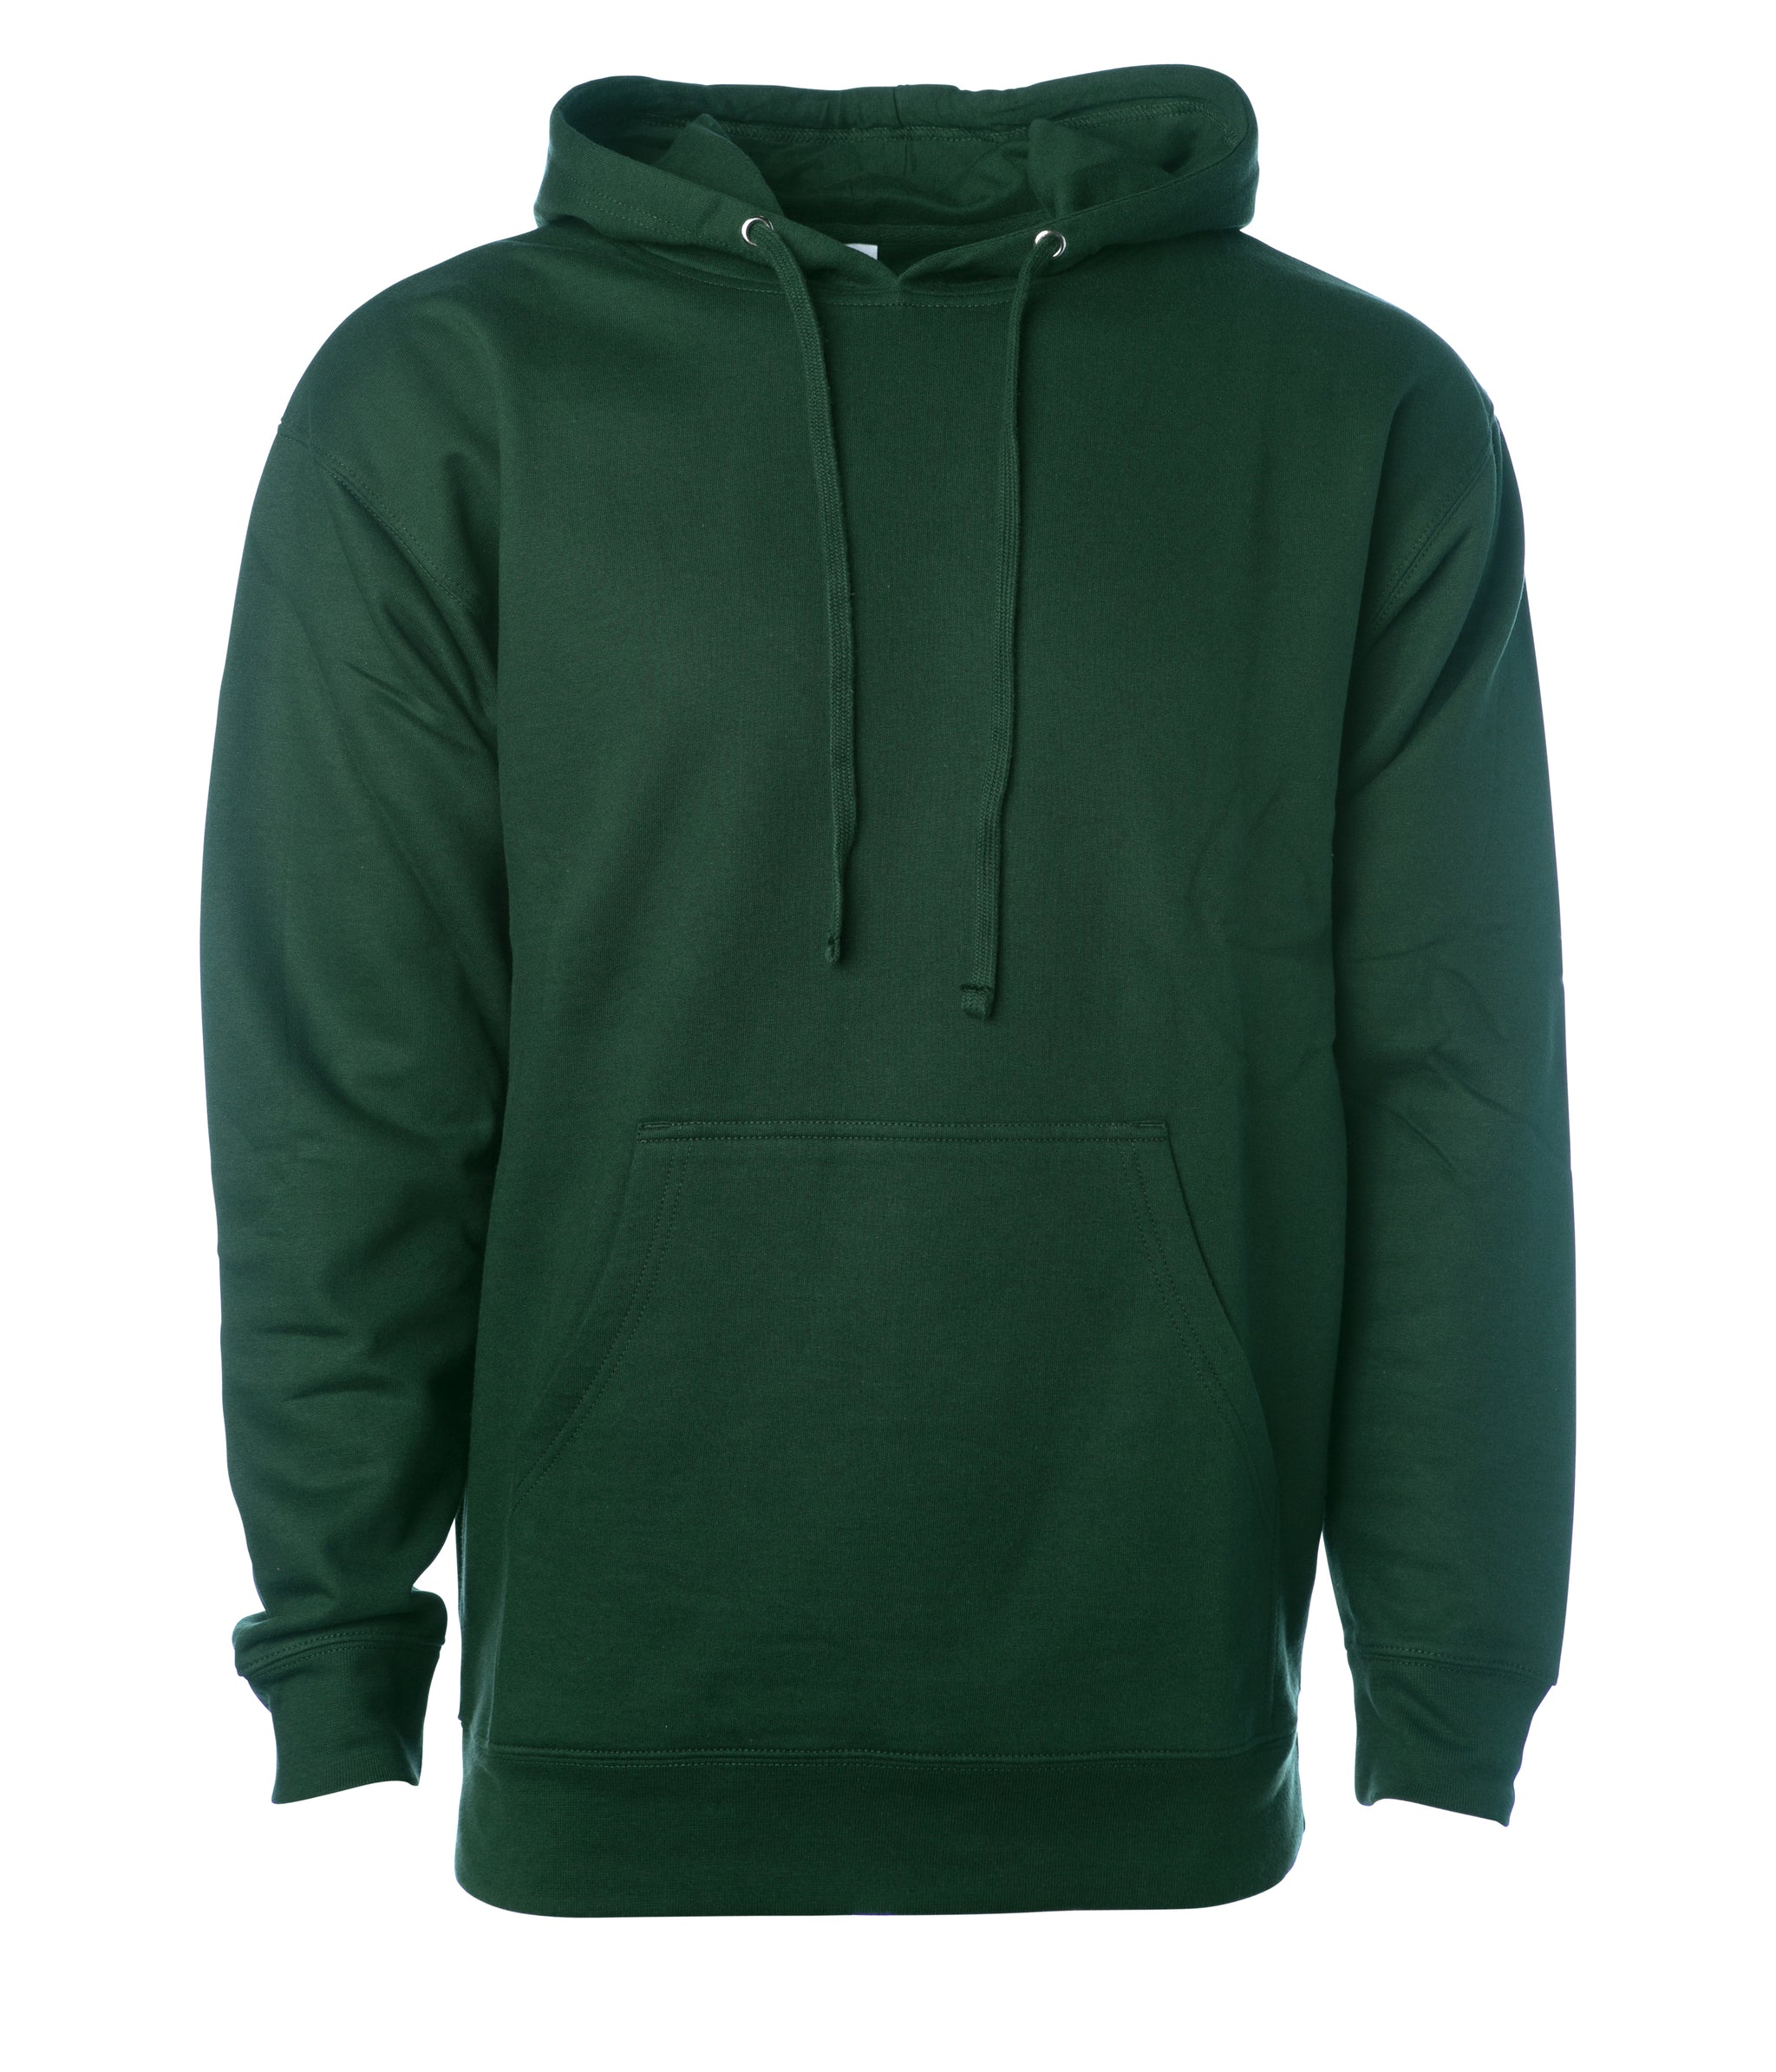 Midweight Hooded Pullover Sweatshirts  Best Value Midweight Hoodie -  Independent Trading Company